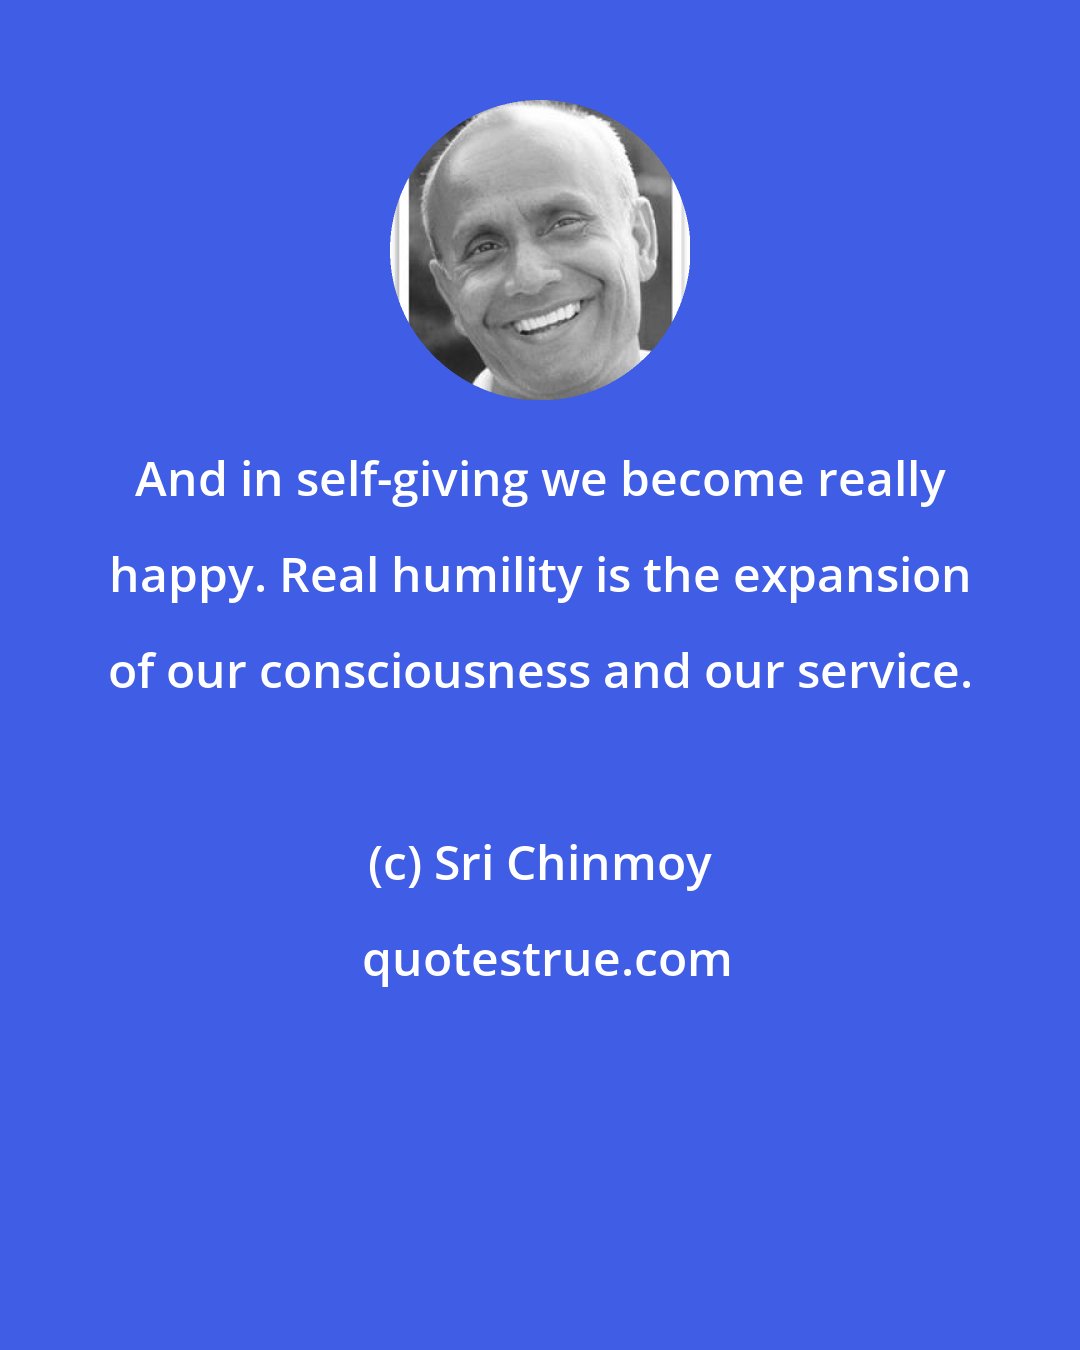 Sri Chinmoy: And in self-giving we become really happy. Real humility is the expansion of our consciousness and our service.